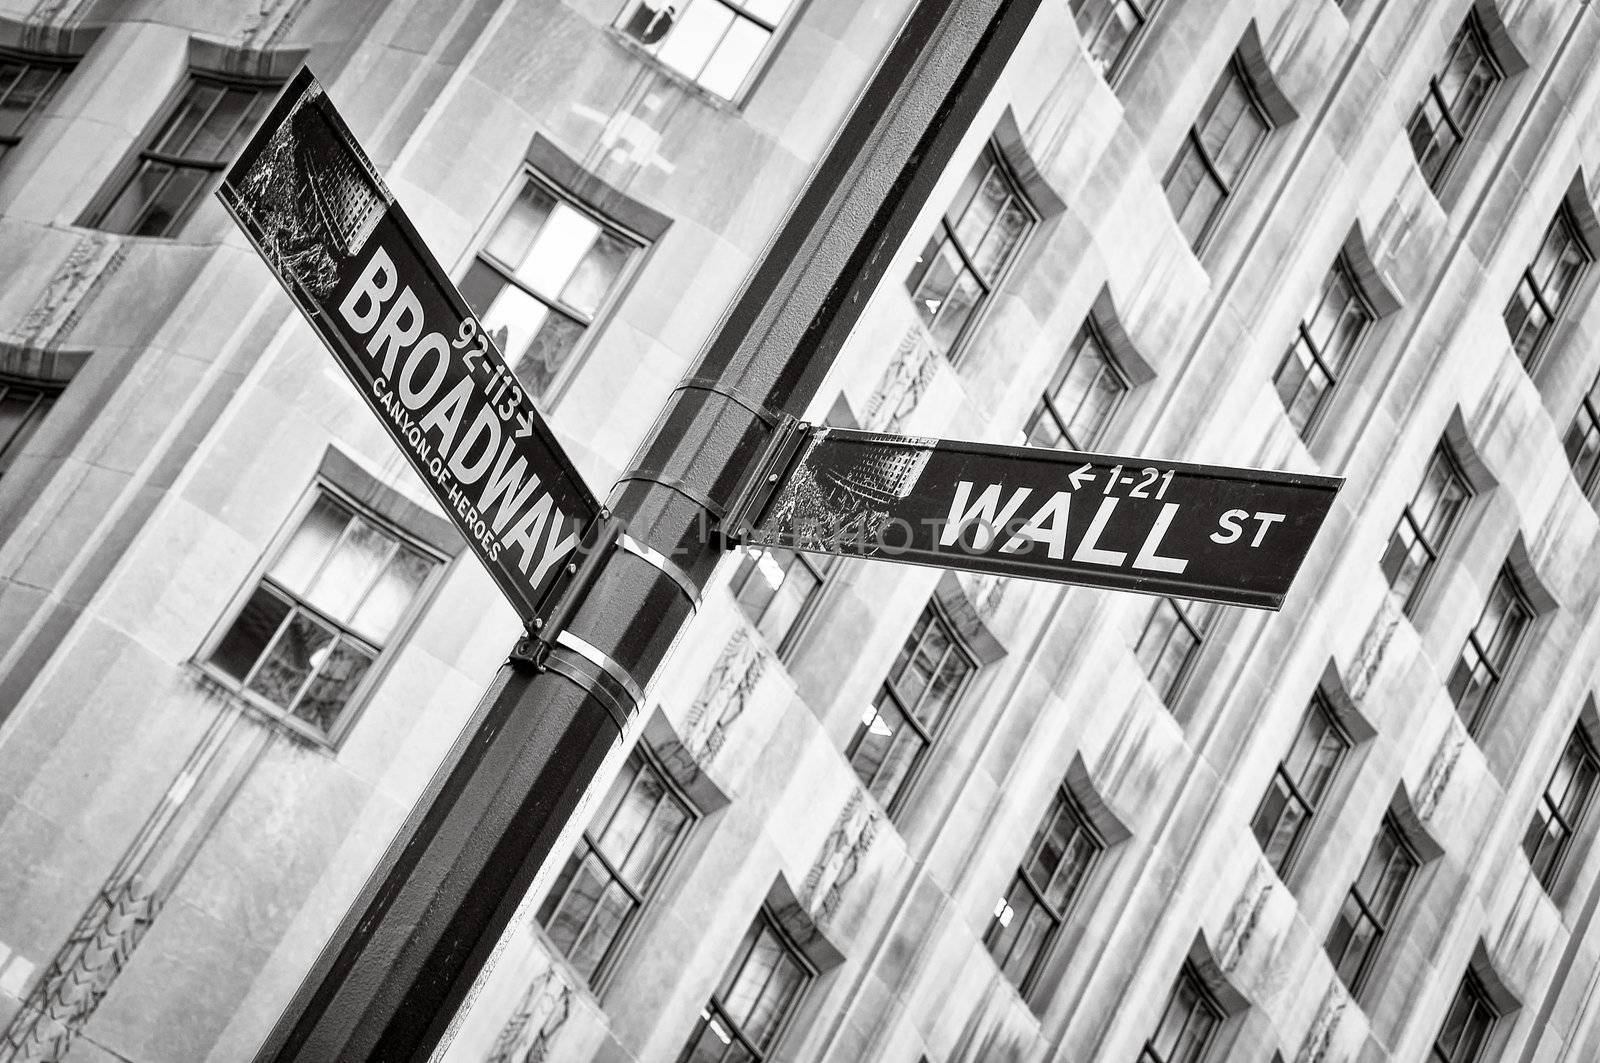 Wall street and Broadway street sign black and white, New York by martinm303